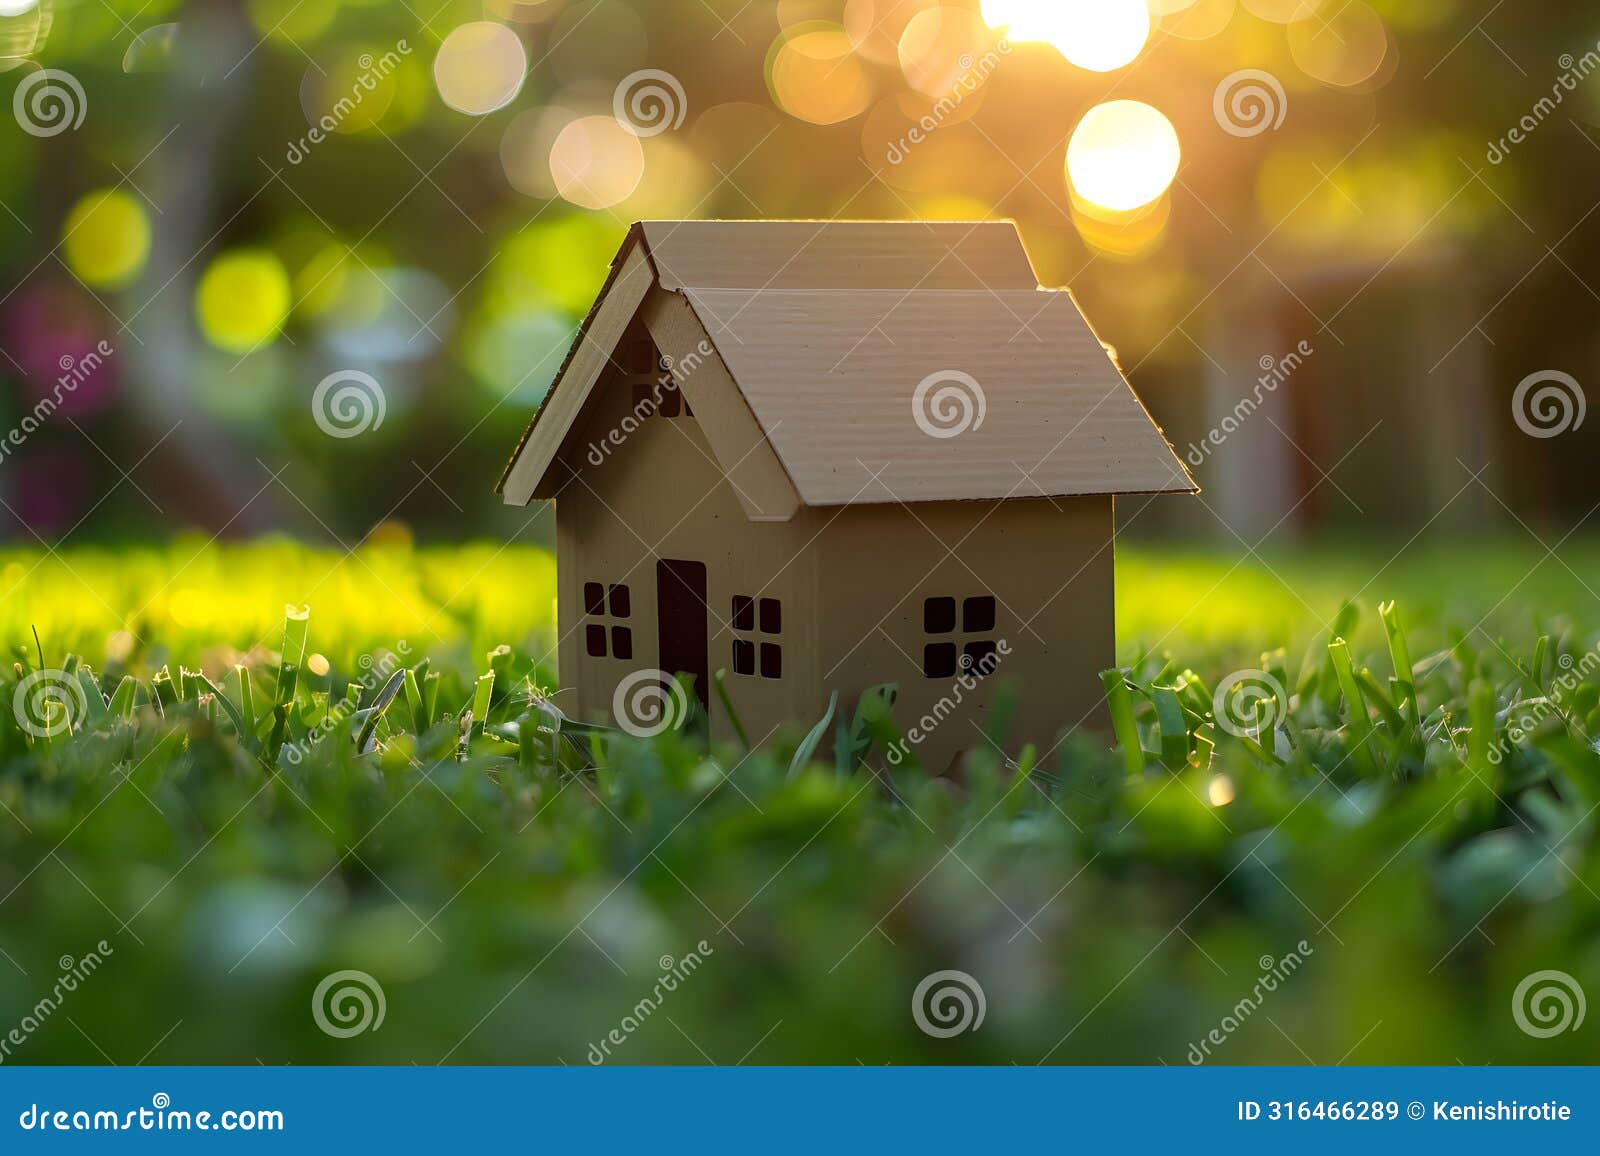 green and environmentally friendly housing concept. miniature wooden house in spring grass on a sunny day.